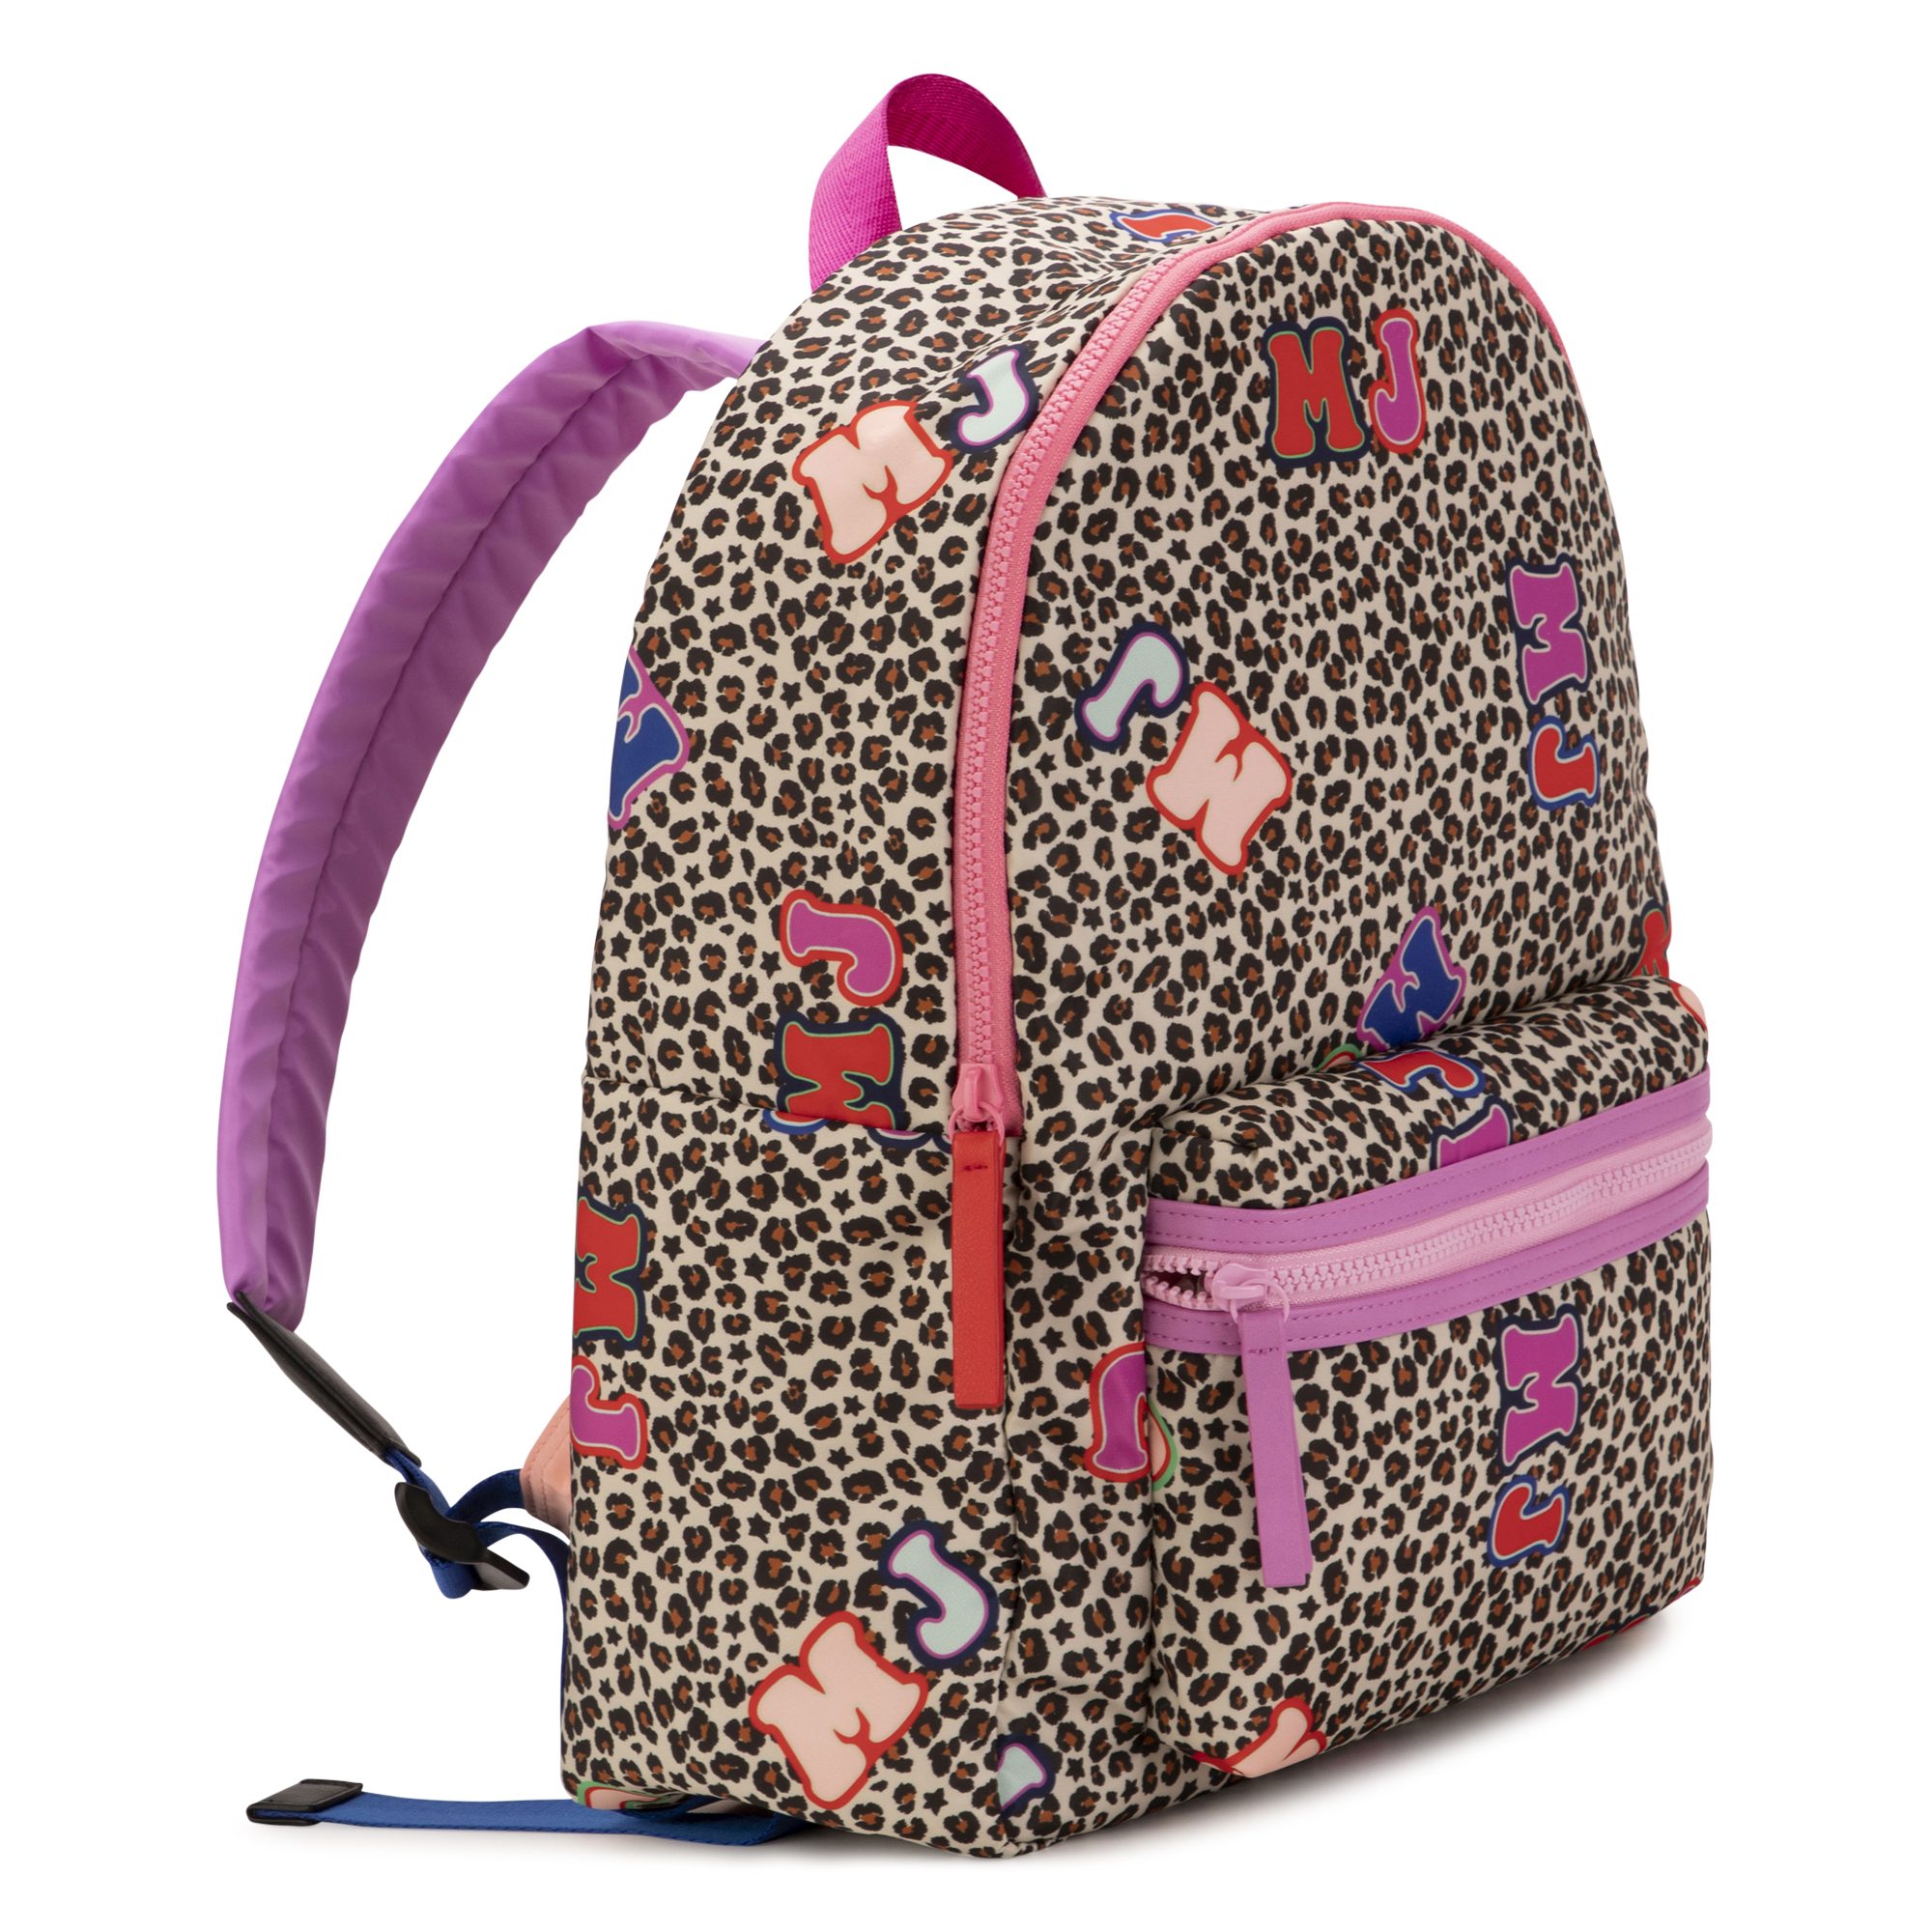 "THE BACKPACK" MARC JACOBS for GIRL